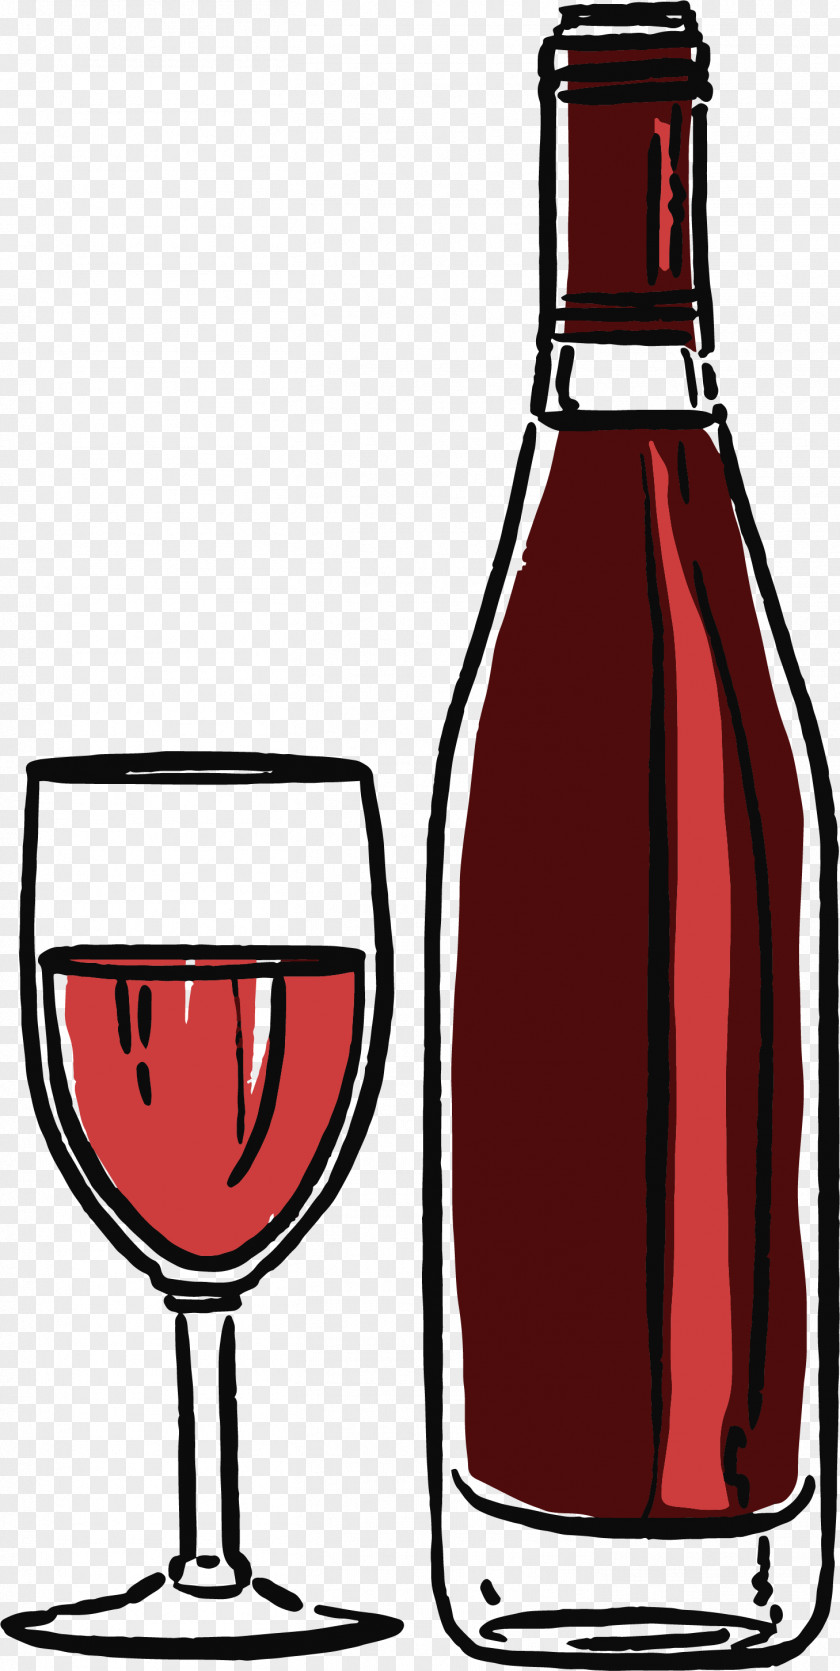 Do Not Drink Alcohol Red Wine Glass Alcoholic Dessert PNG